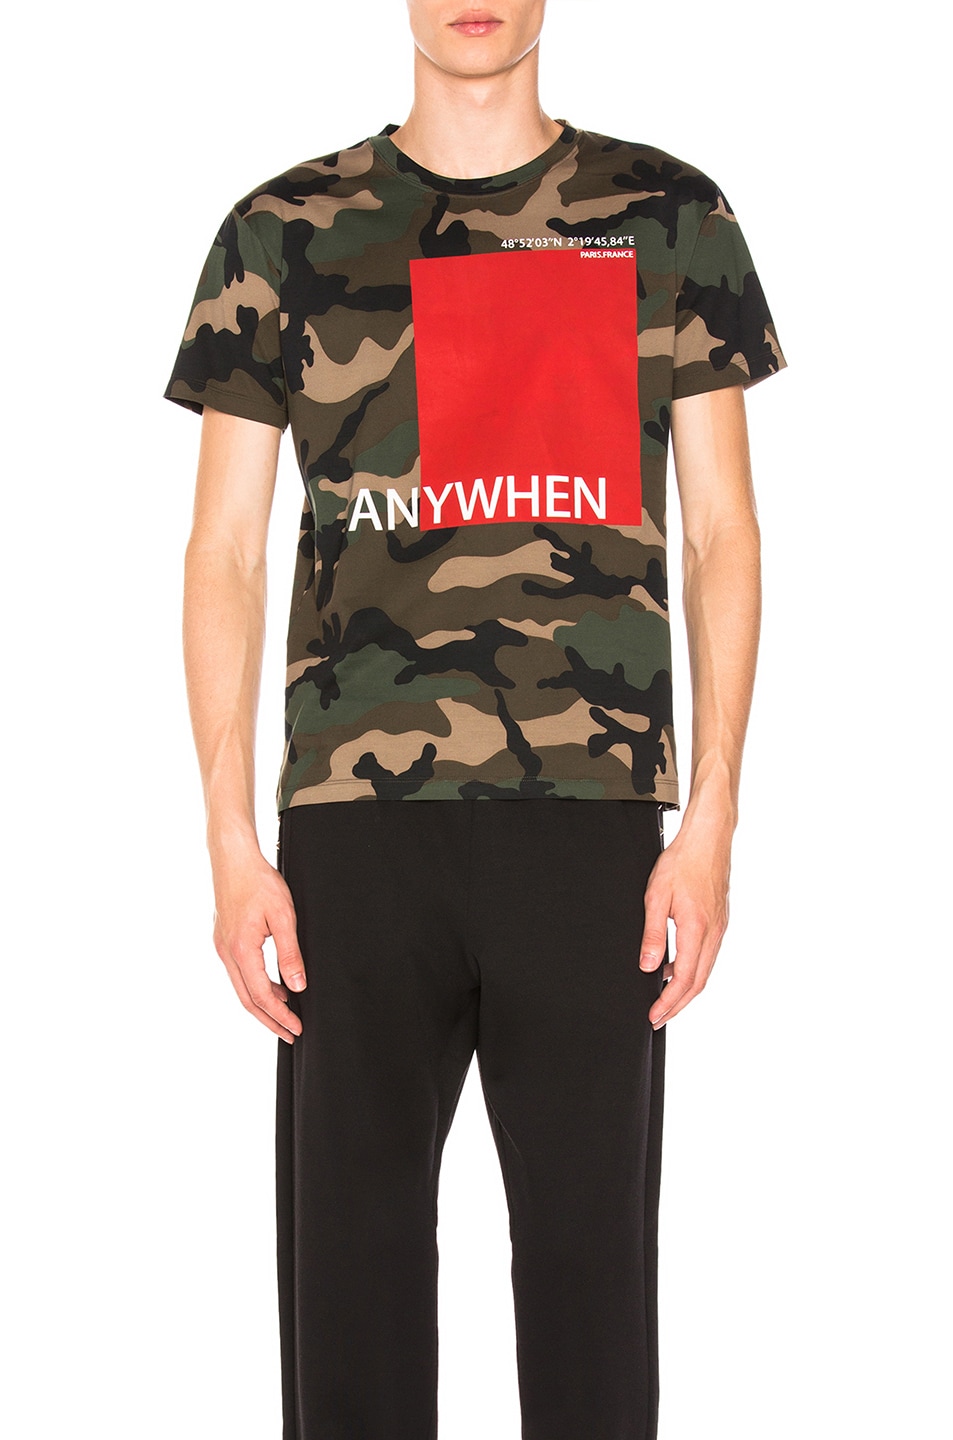 Image 1 of Valentino Garavani Anywhen Tee in Camouflage & Red